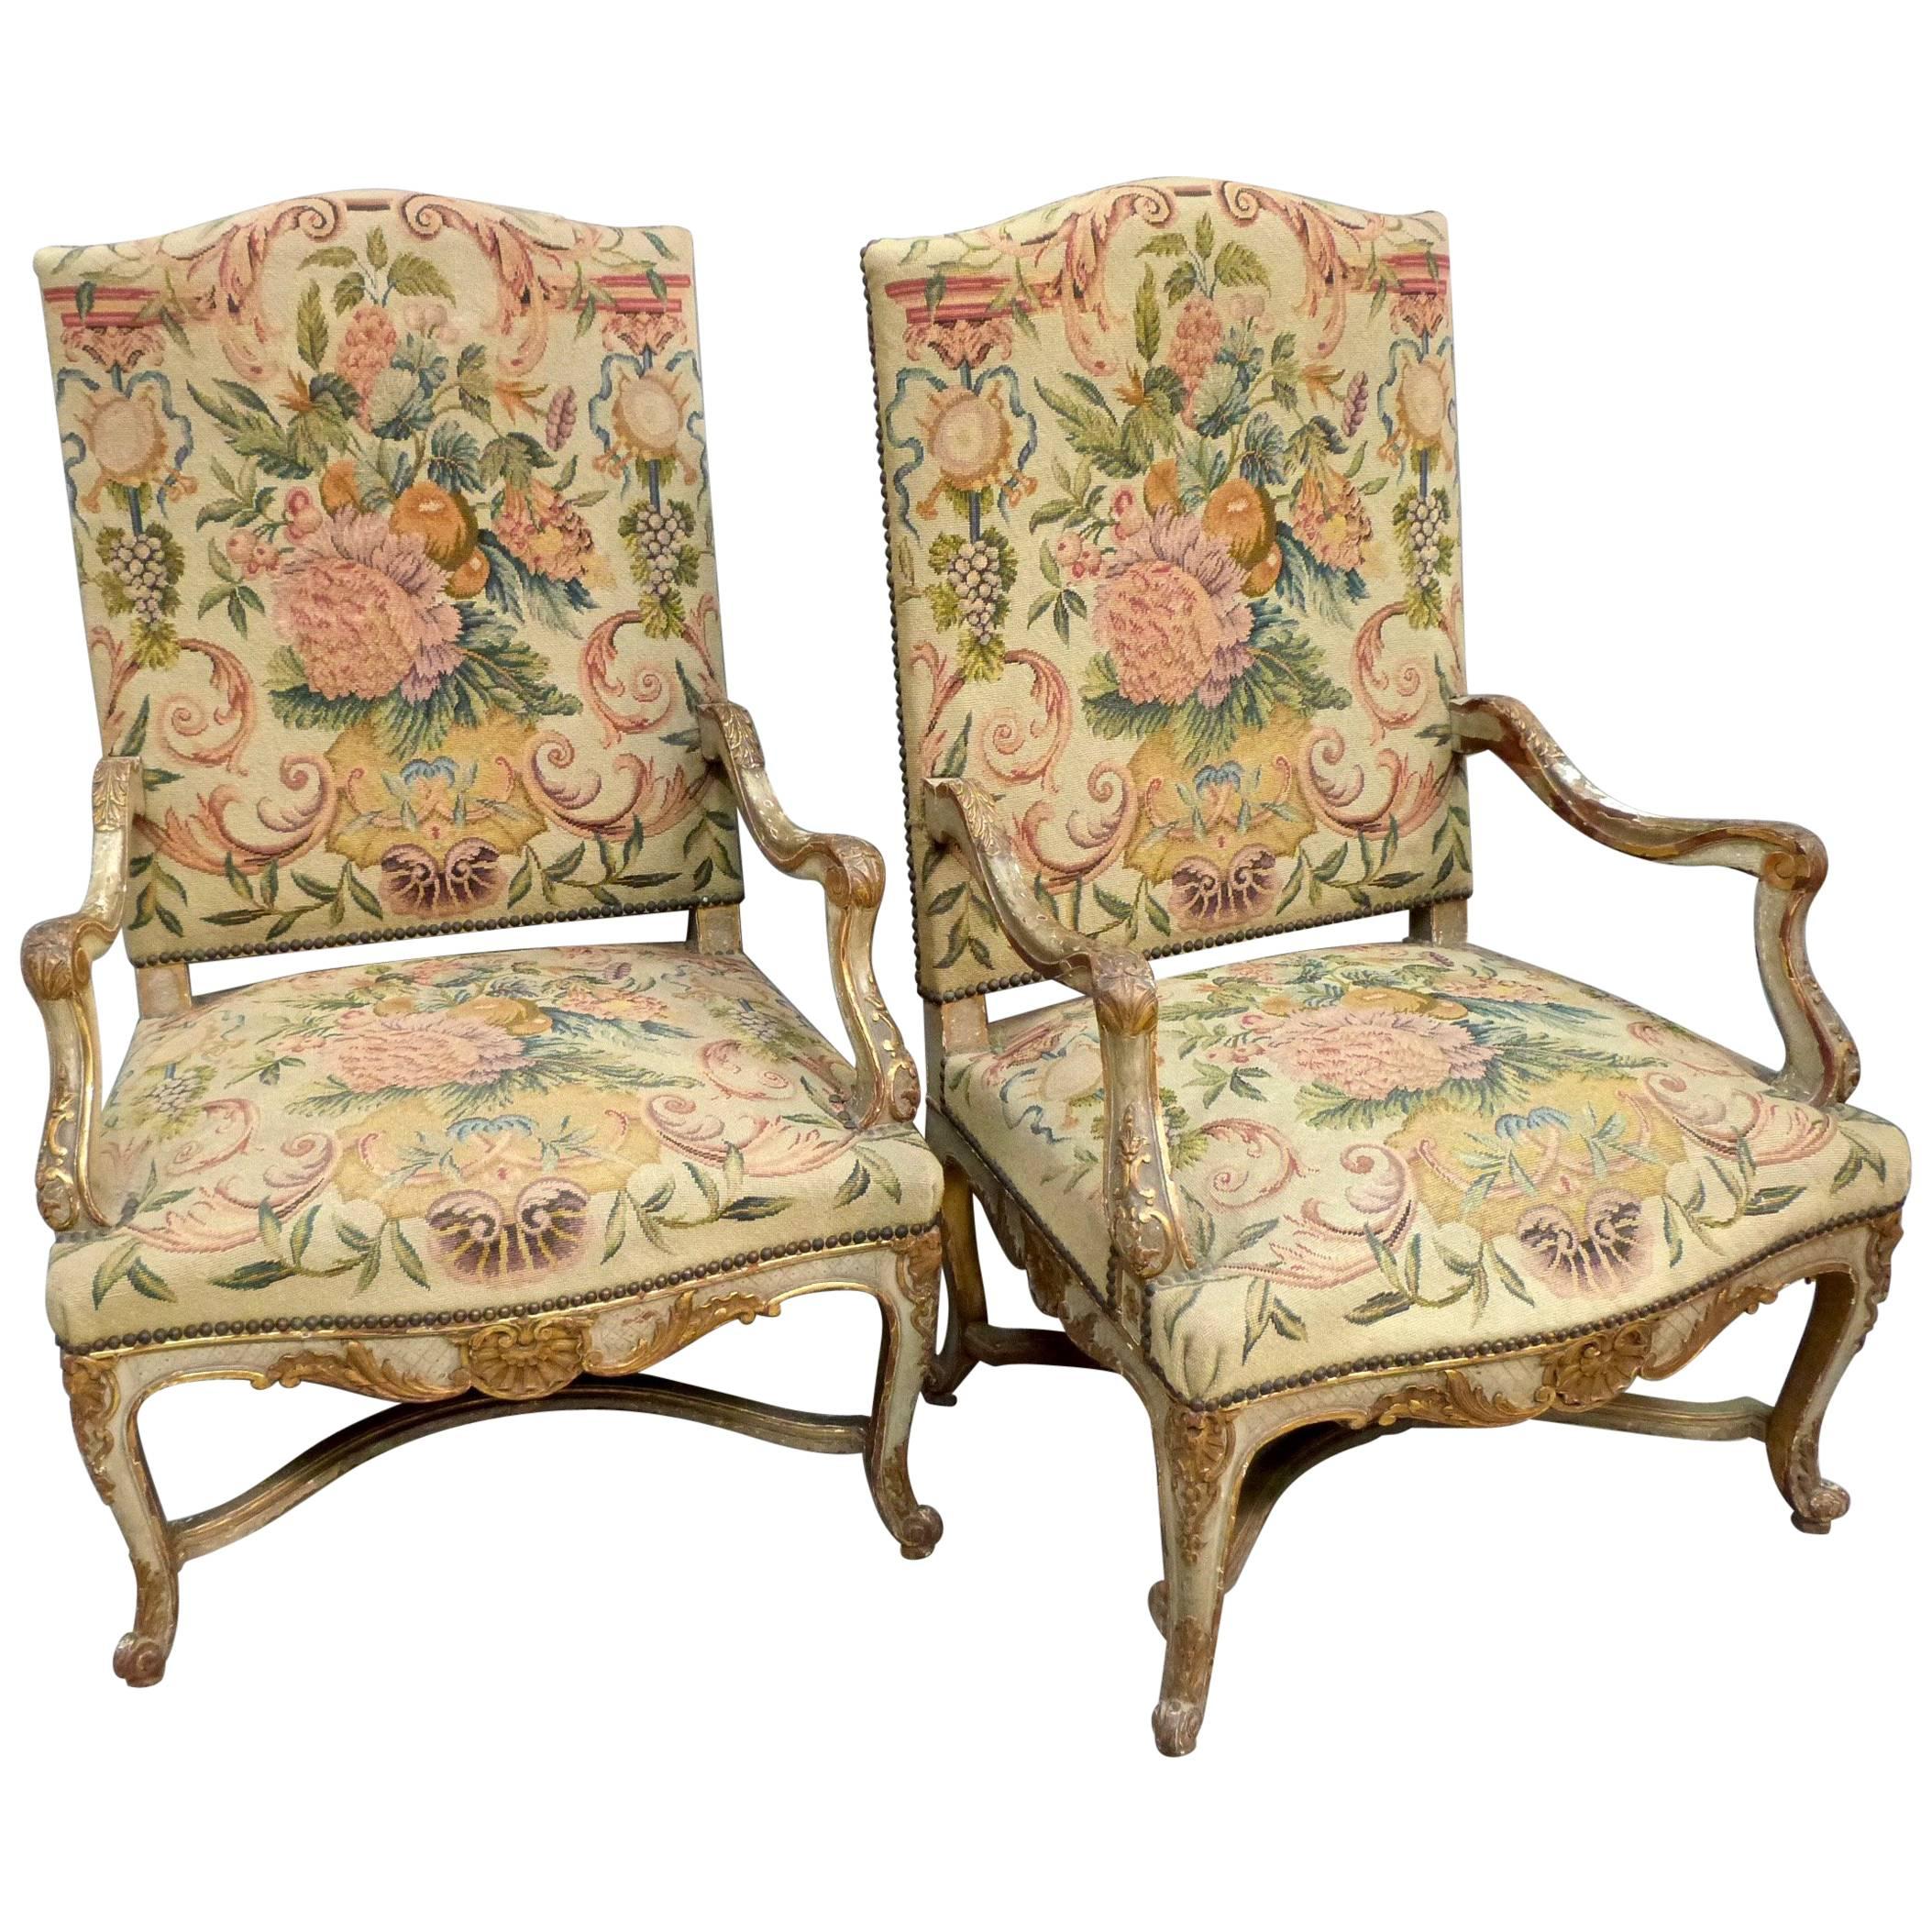 Pair of 19th Century French Painted and Gilt Armchairs For Sale